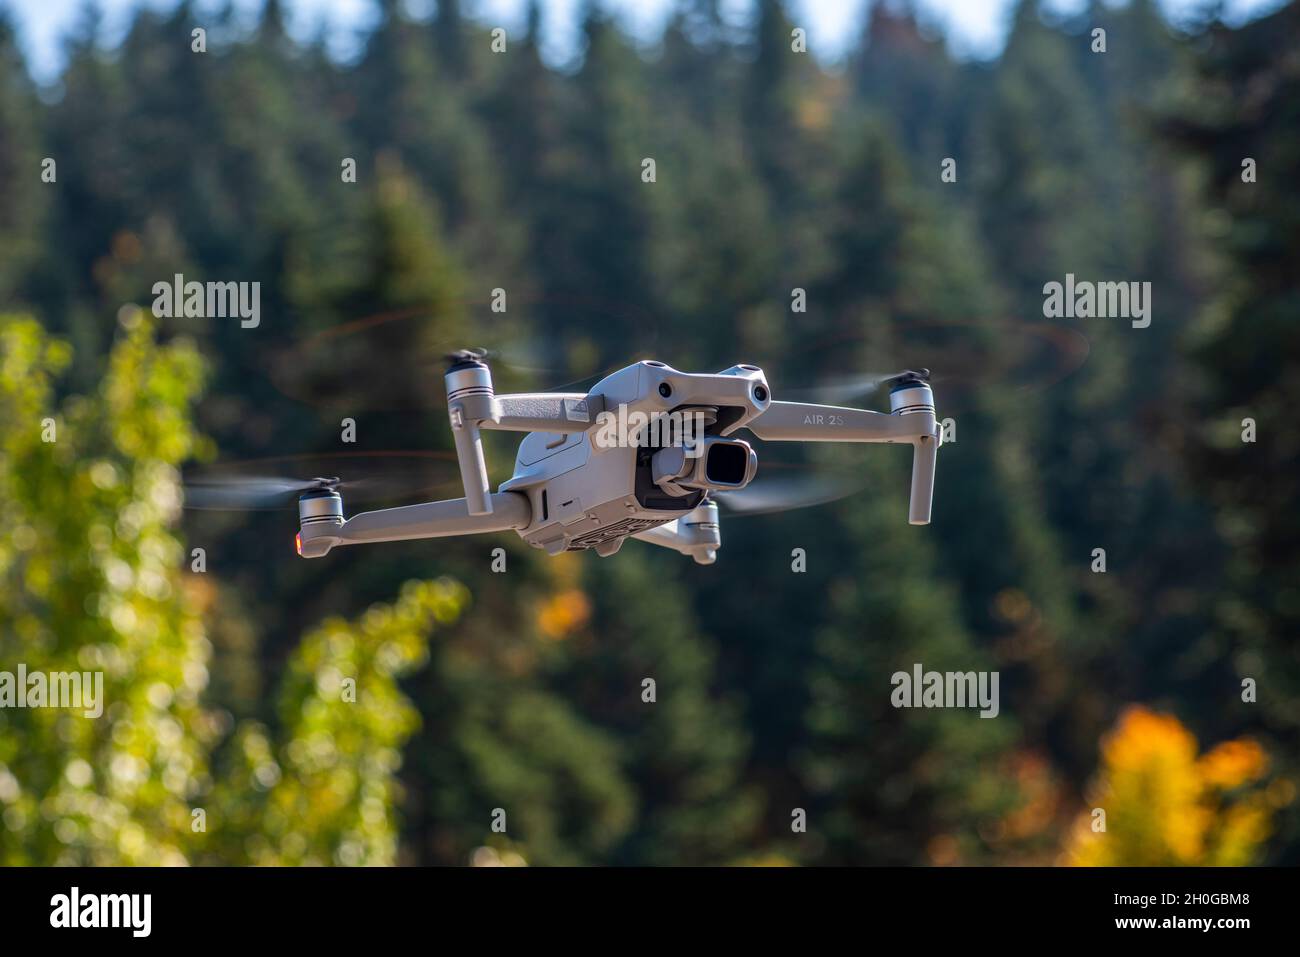 ISTANBUL, TURKEY - OCTOBER 11, 2021: DJI Air 2S Drone flying with green background. Stock Photo